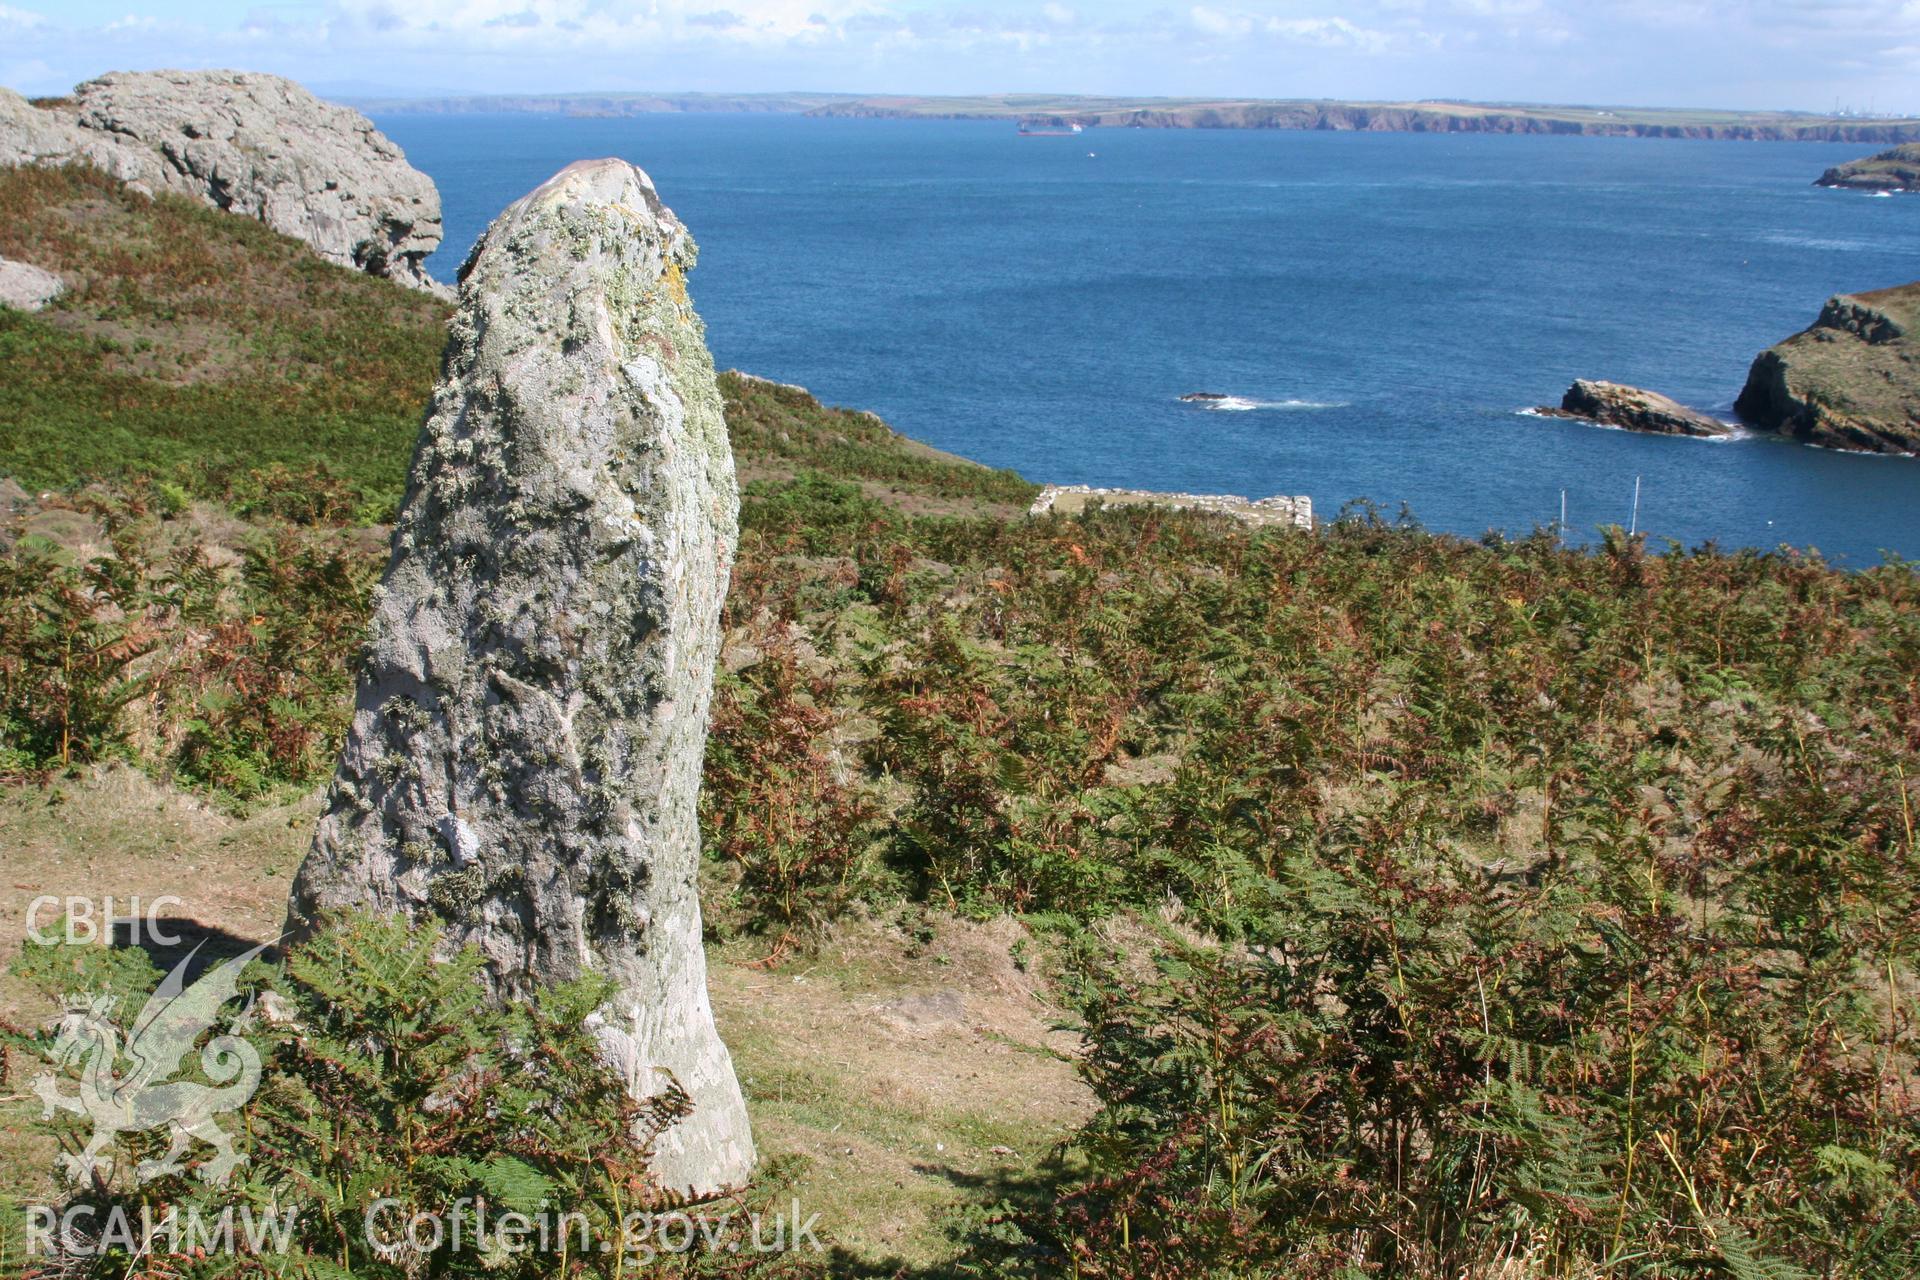 Harold stone standing stone, view from west.